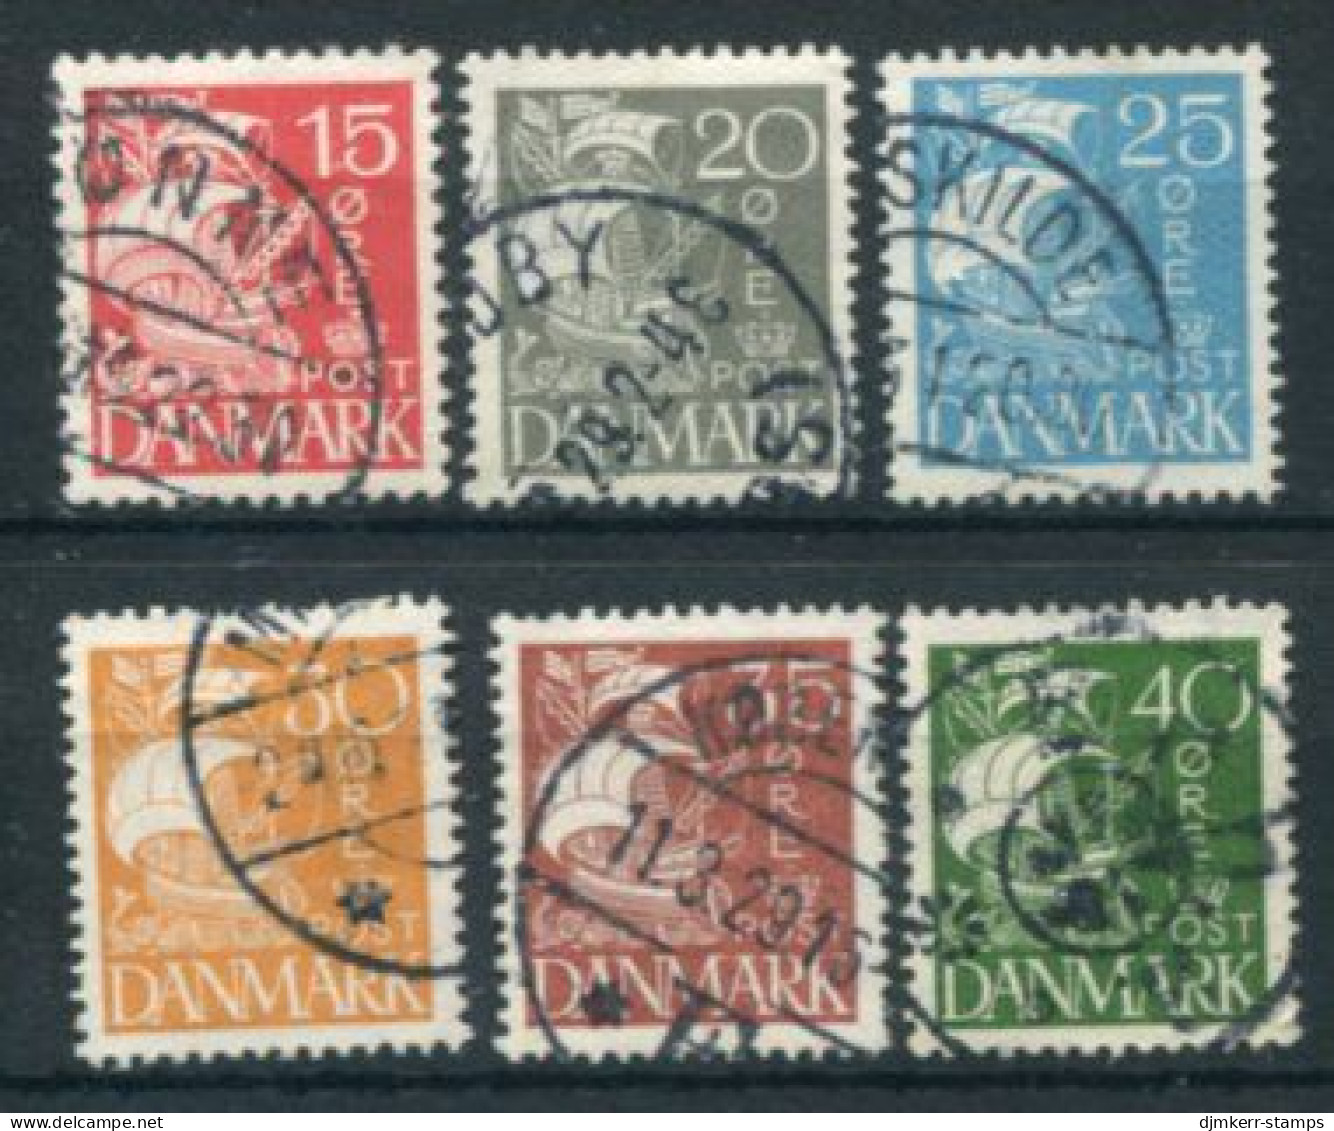 DENMARK 1927 Caravel With Solid Background Set Of 6 Used.  Michel 168-73 - Gebraucht